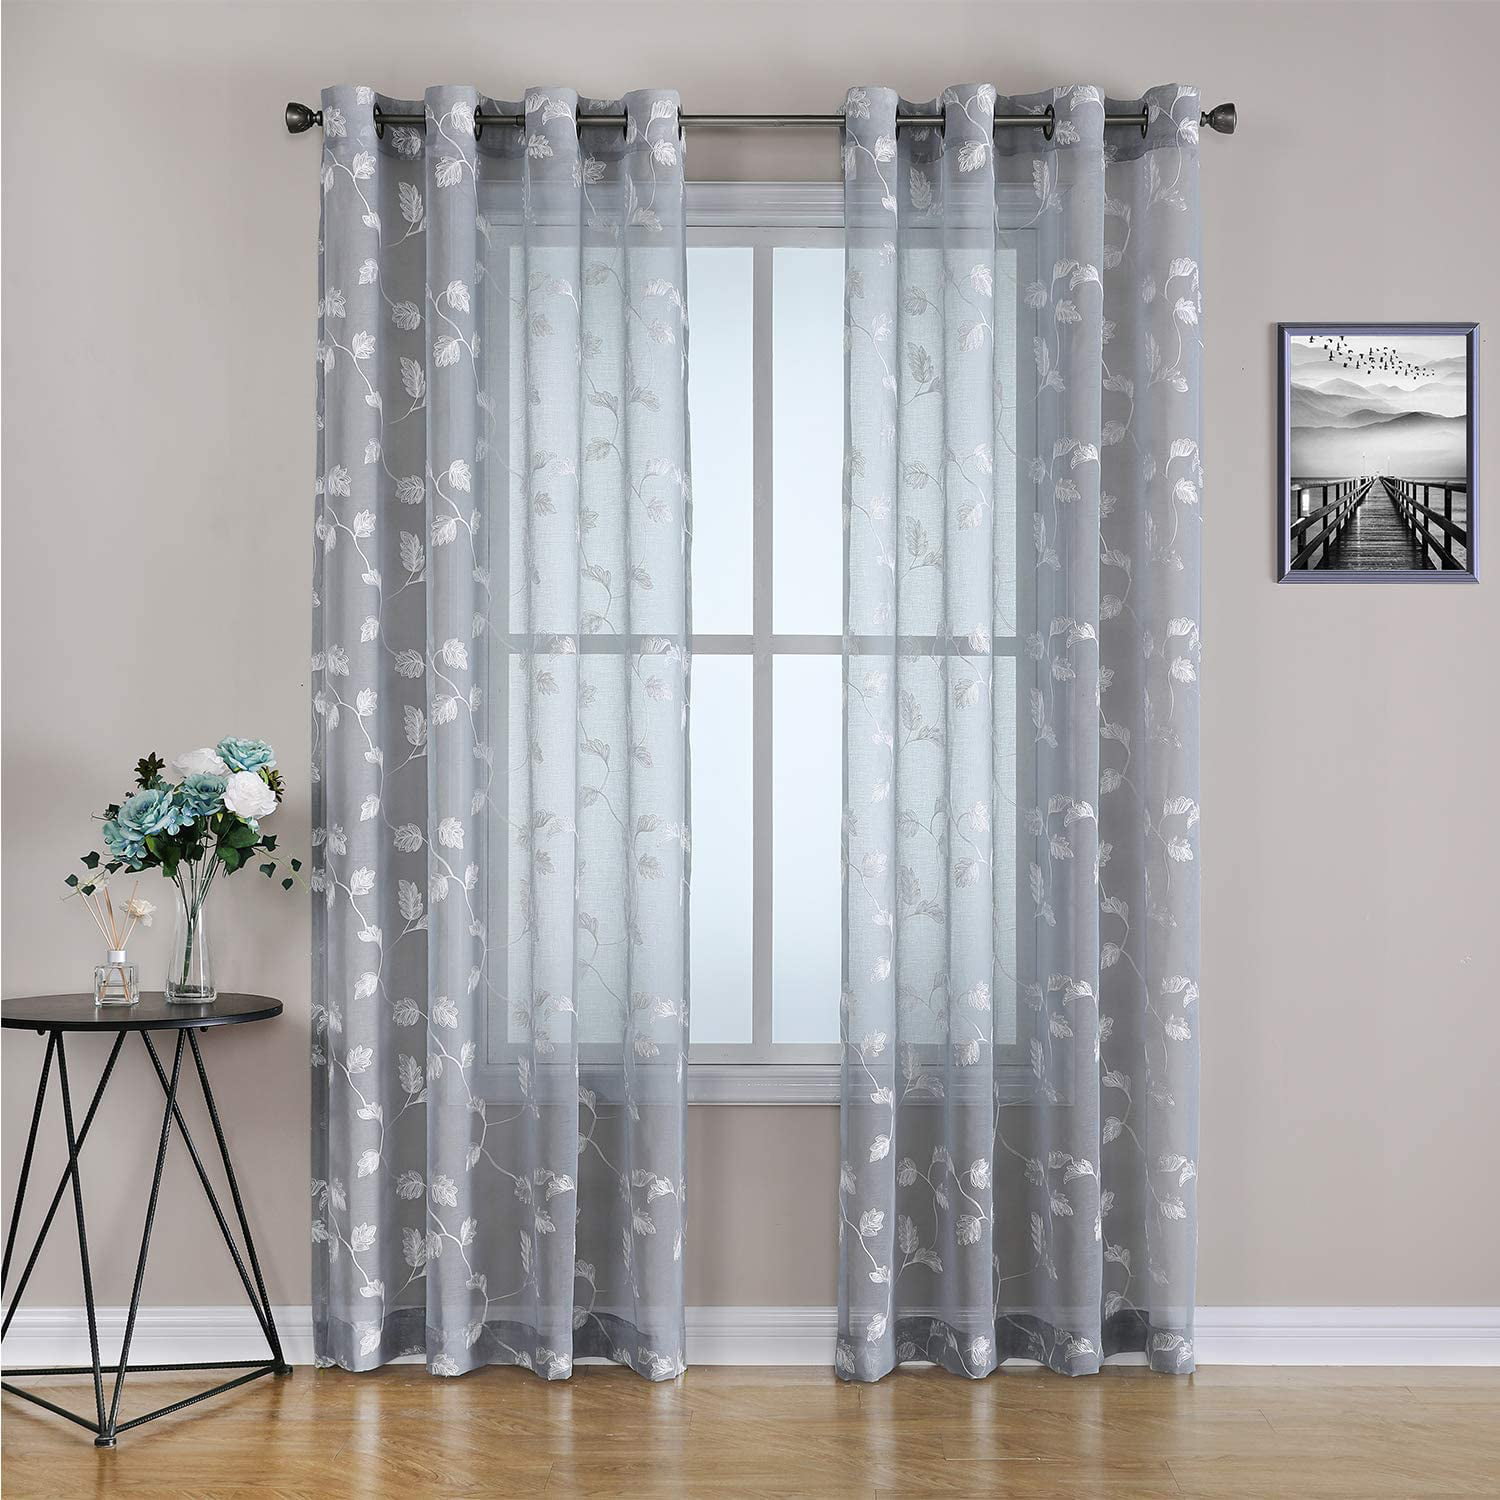 Panels Window Curtains Embroidery Drapes Voile Window Drapes 